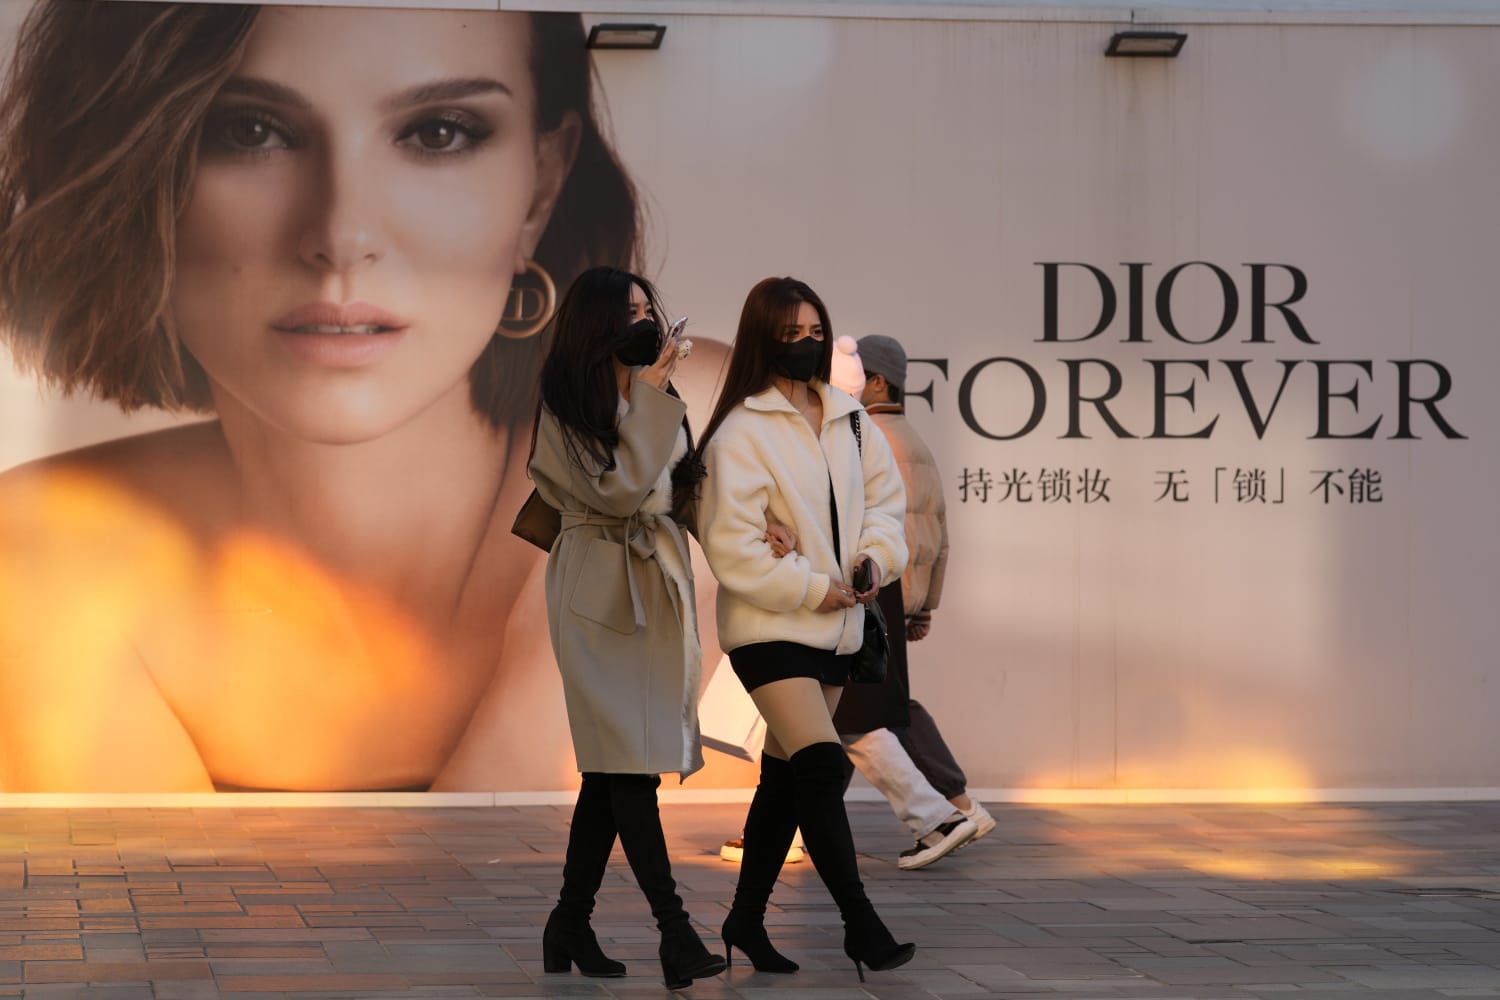 Dior photographer misses the mark with ‘ignorant’ photoshoot in China, infuriating customers